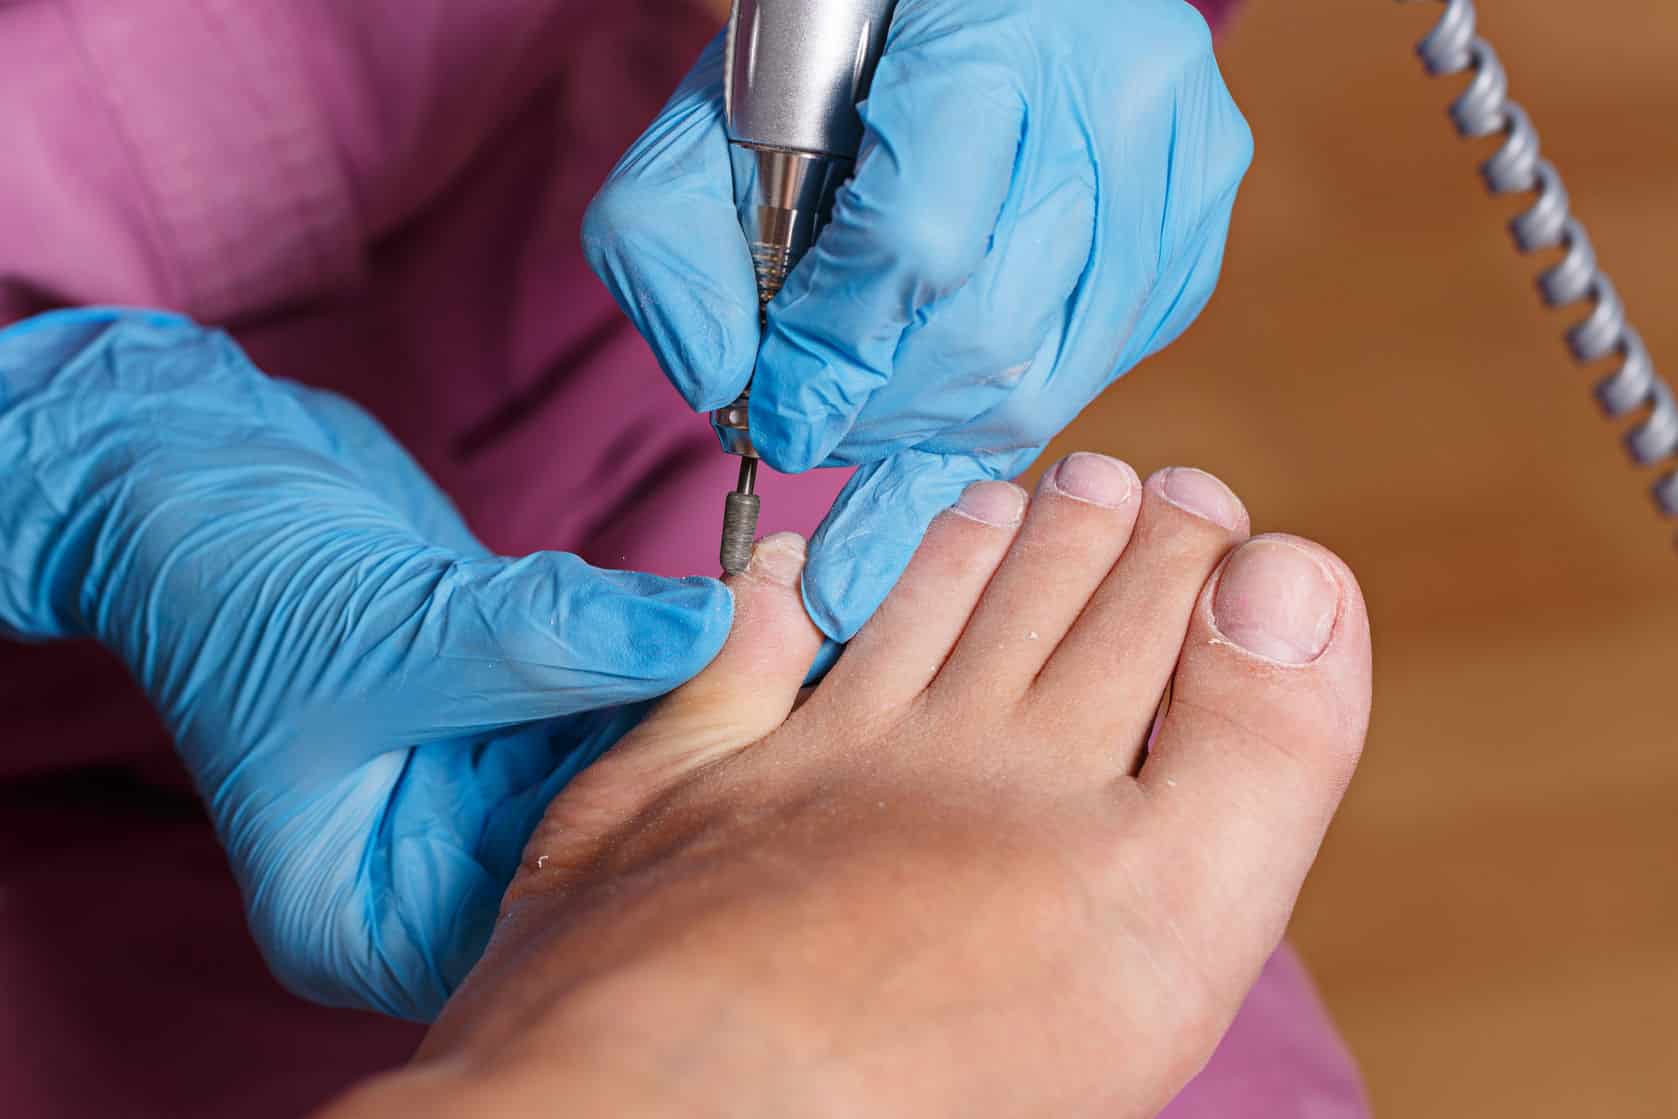 Podiatrist In Burnley Podiatrychiropody Appointments Physiofusion